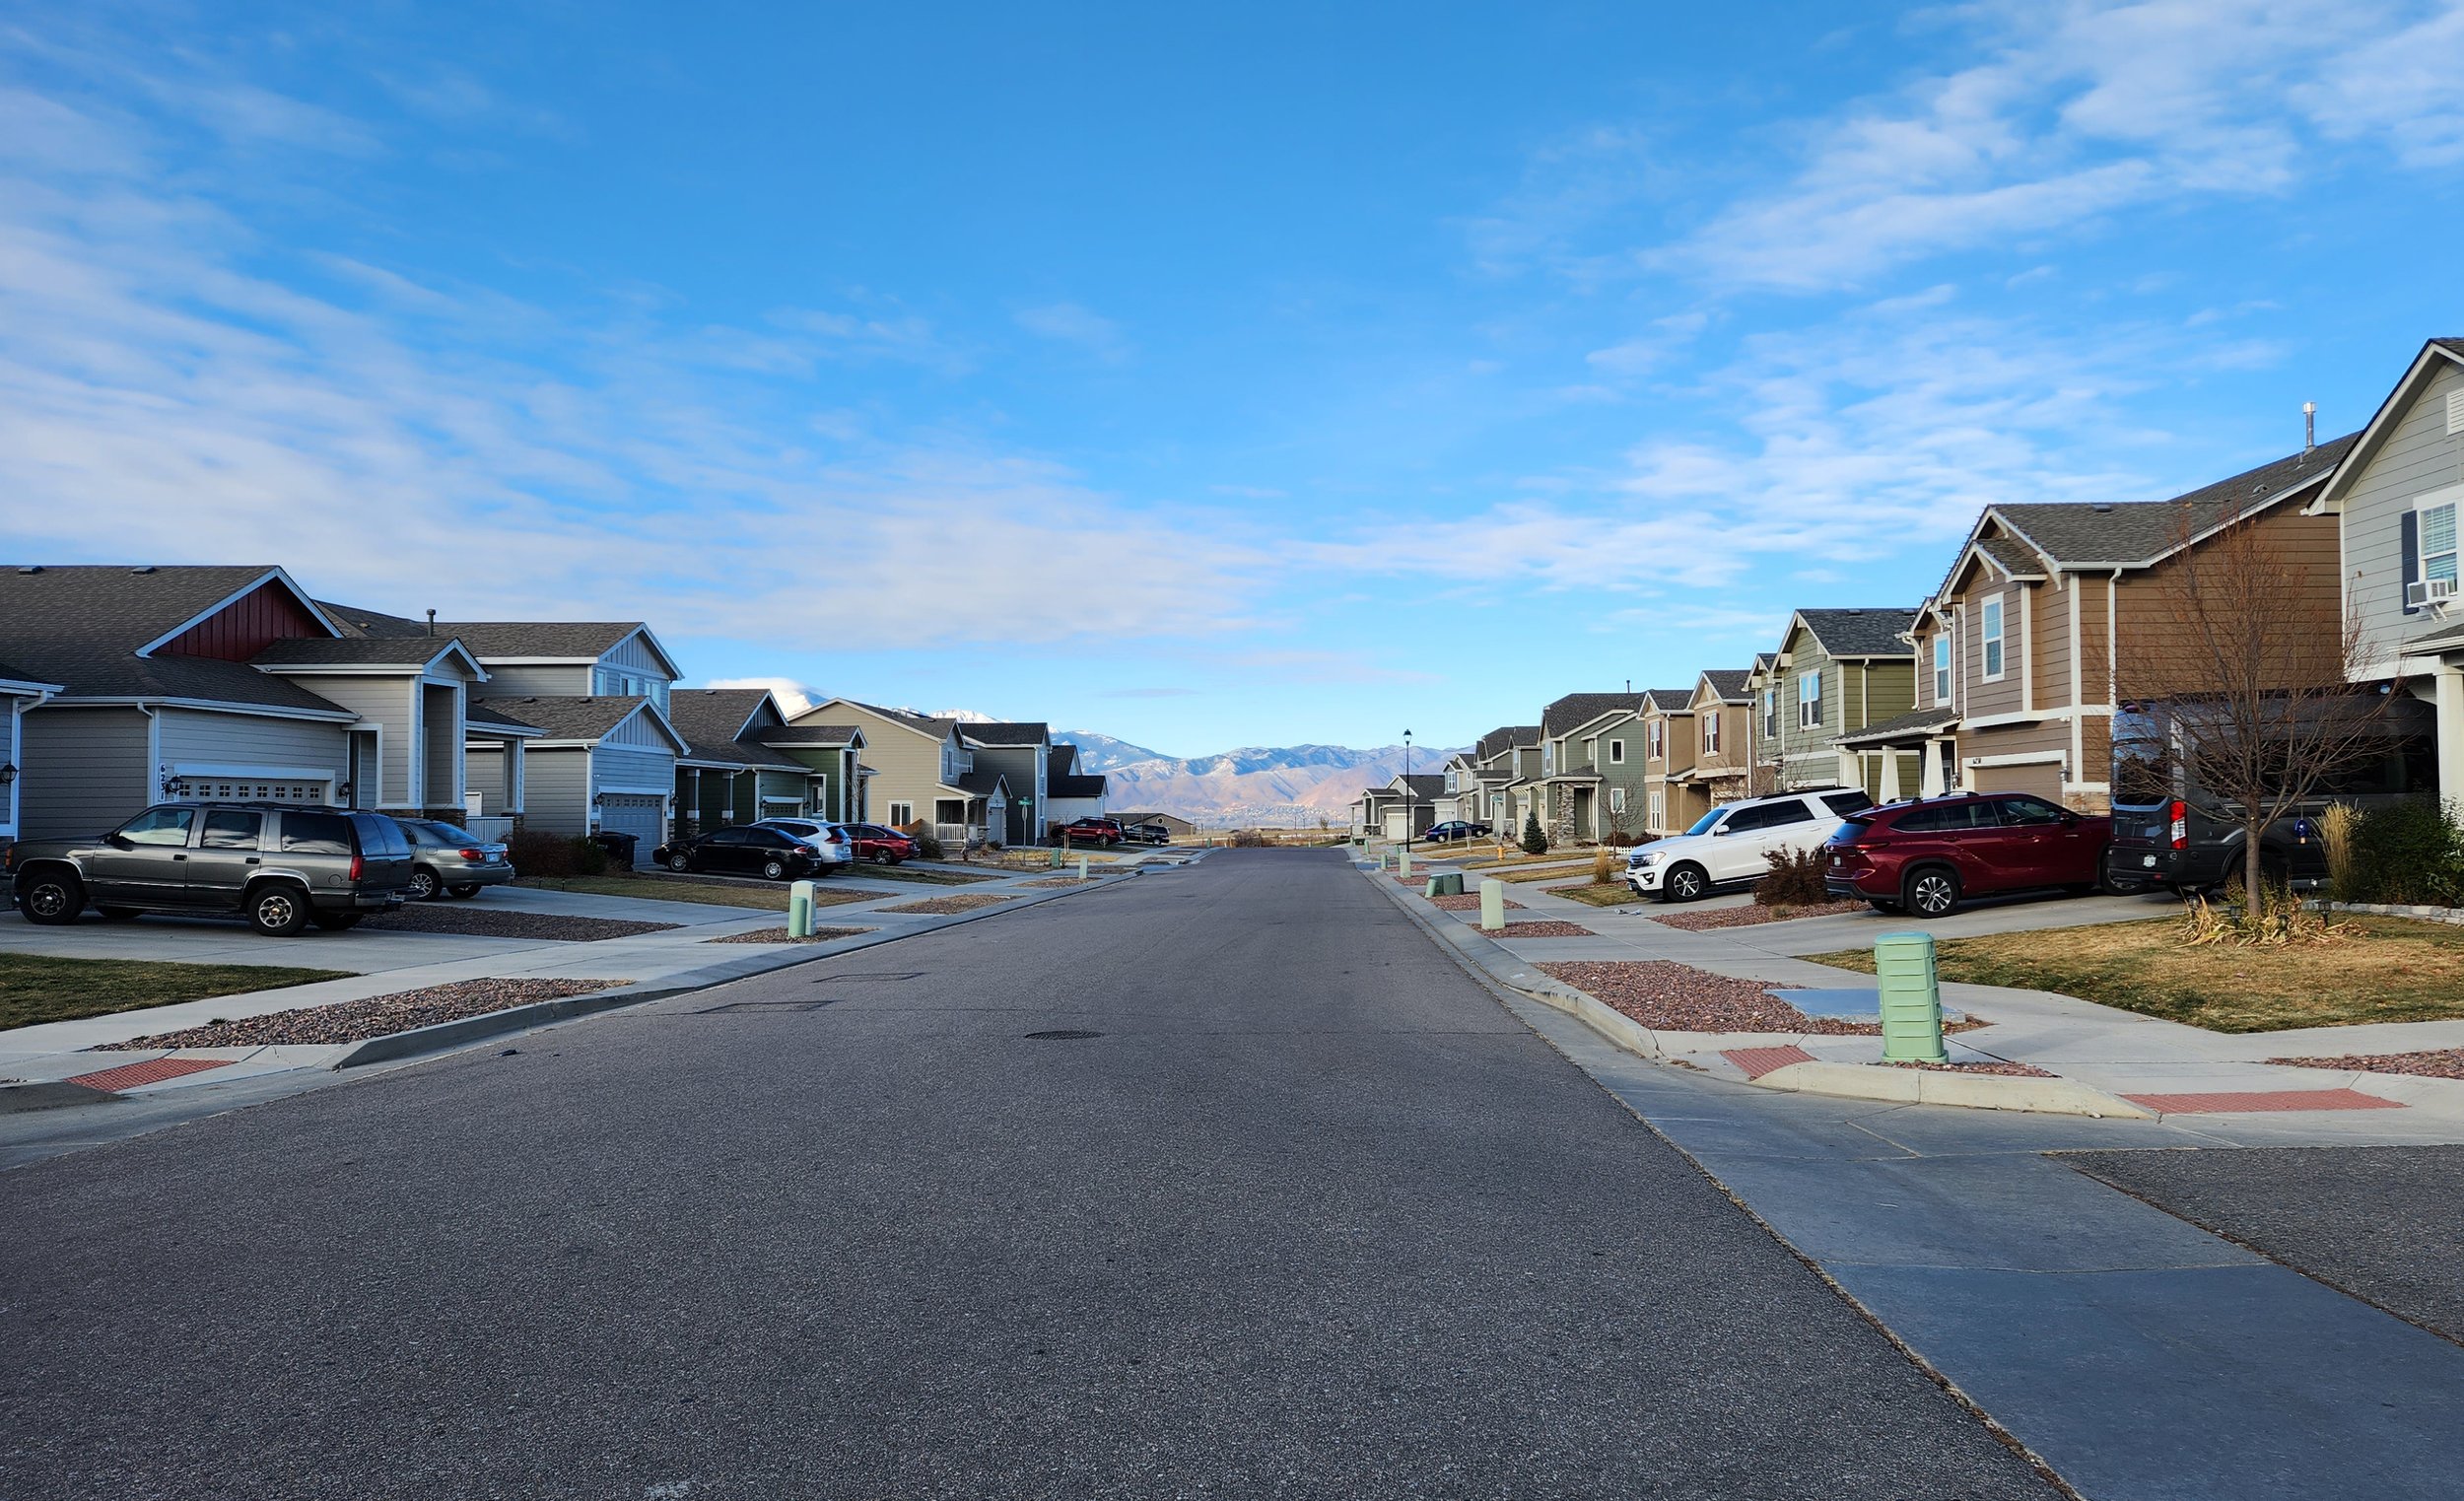 Homes line a stree with the Colorado mountains in the background.